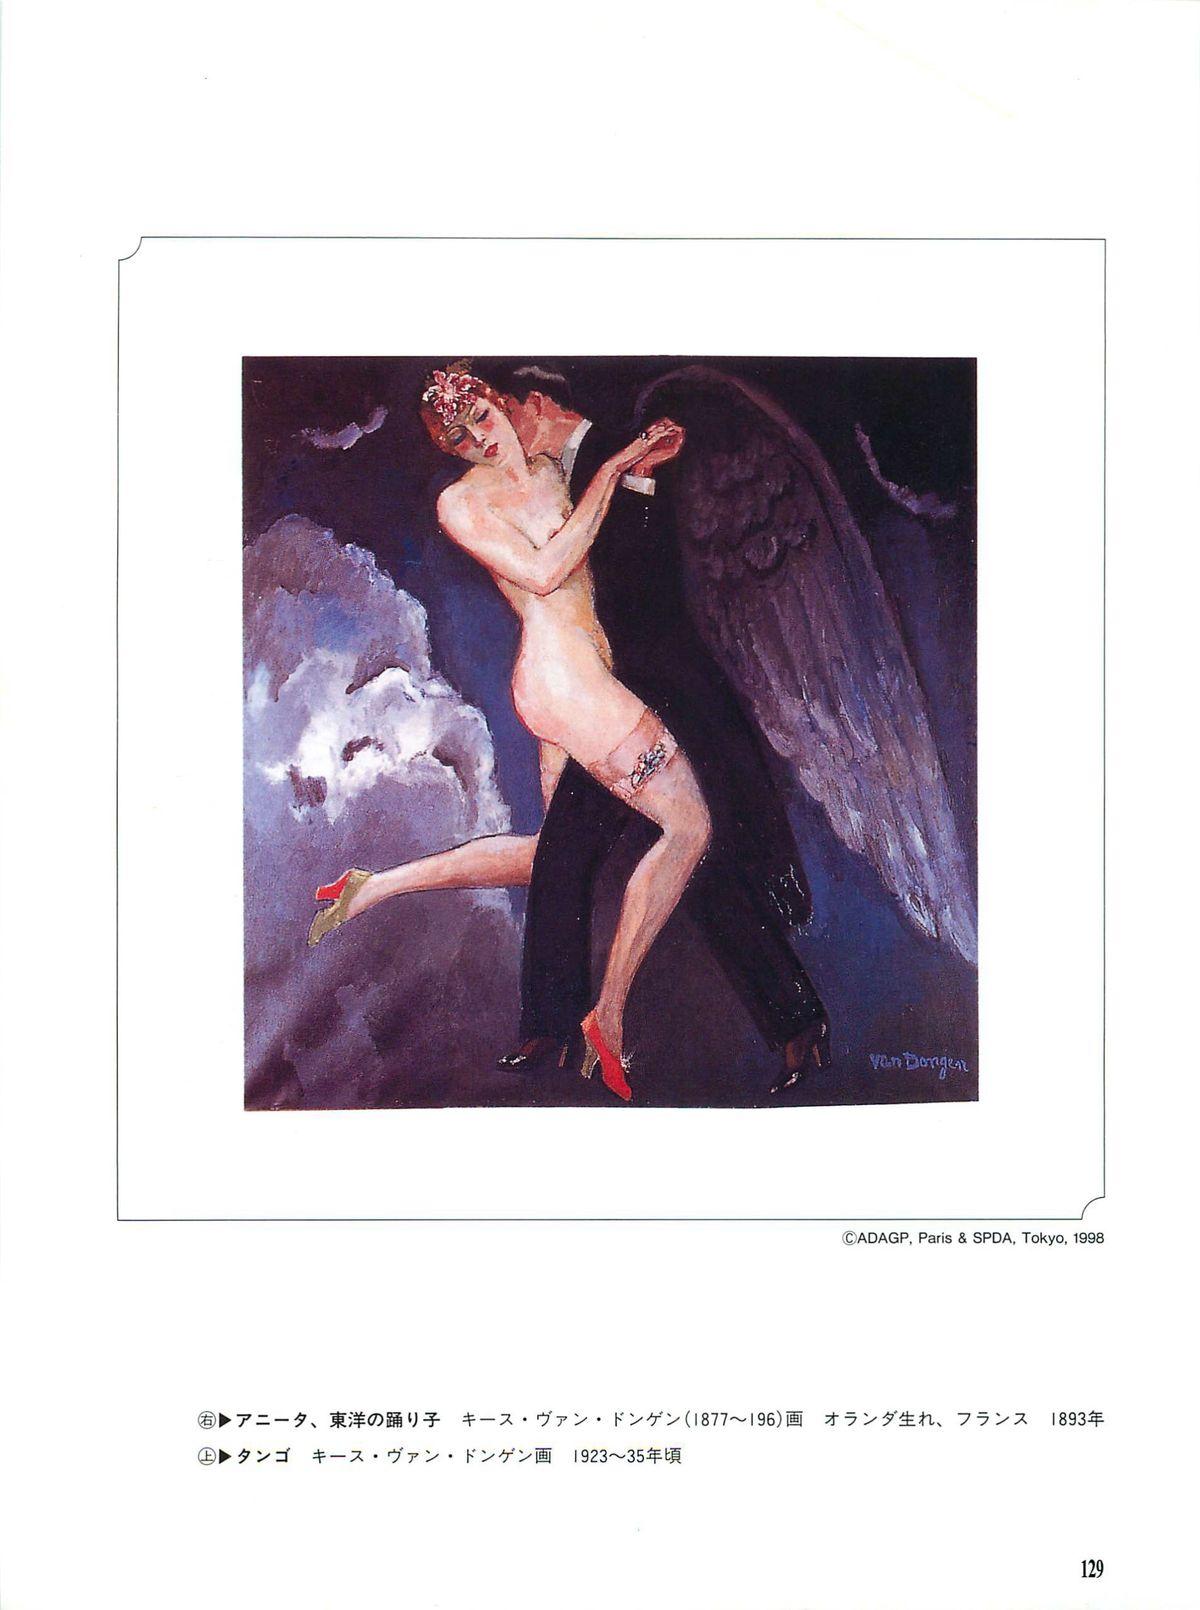 World of Eros: Erotic pieces of the masters 133